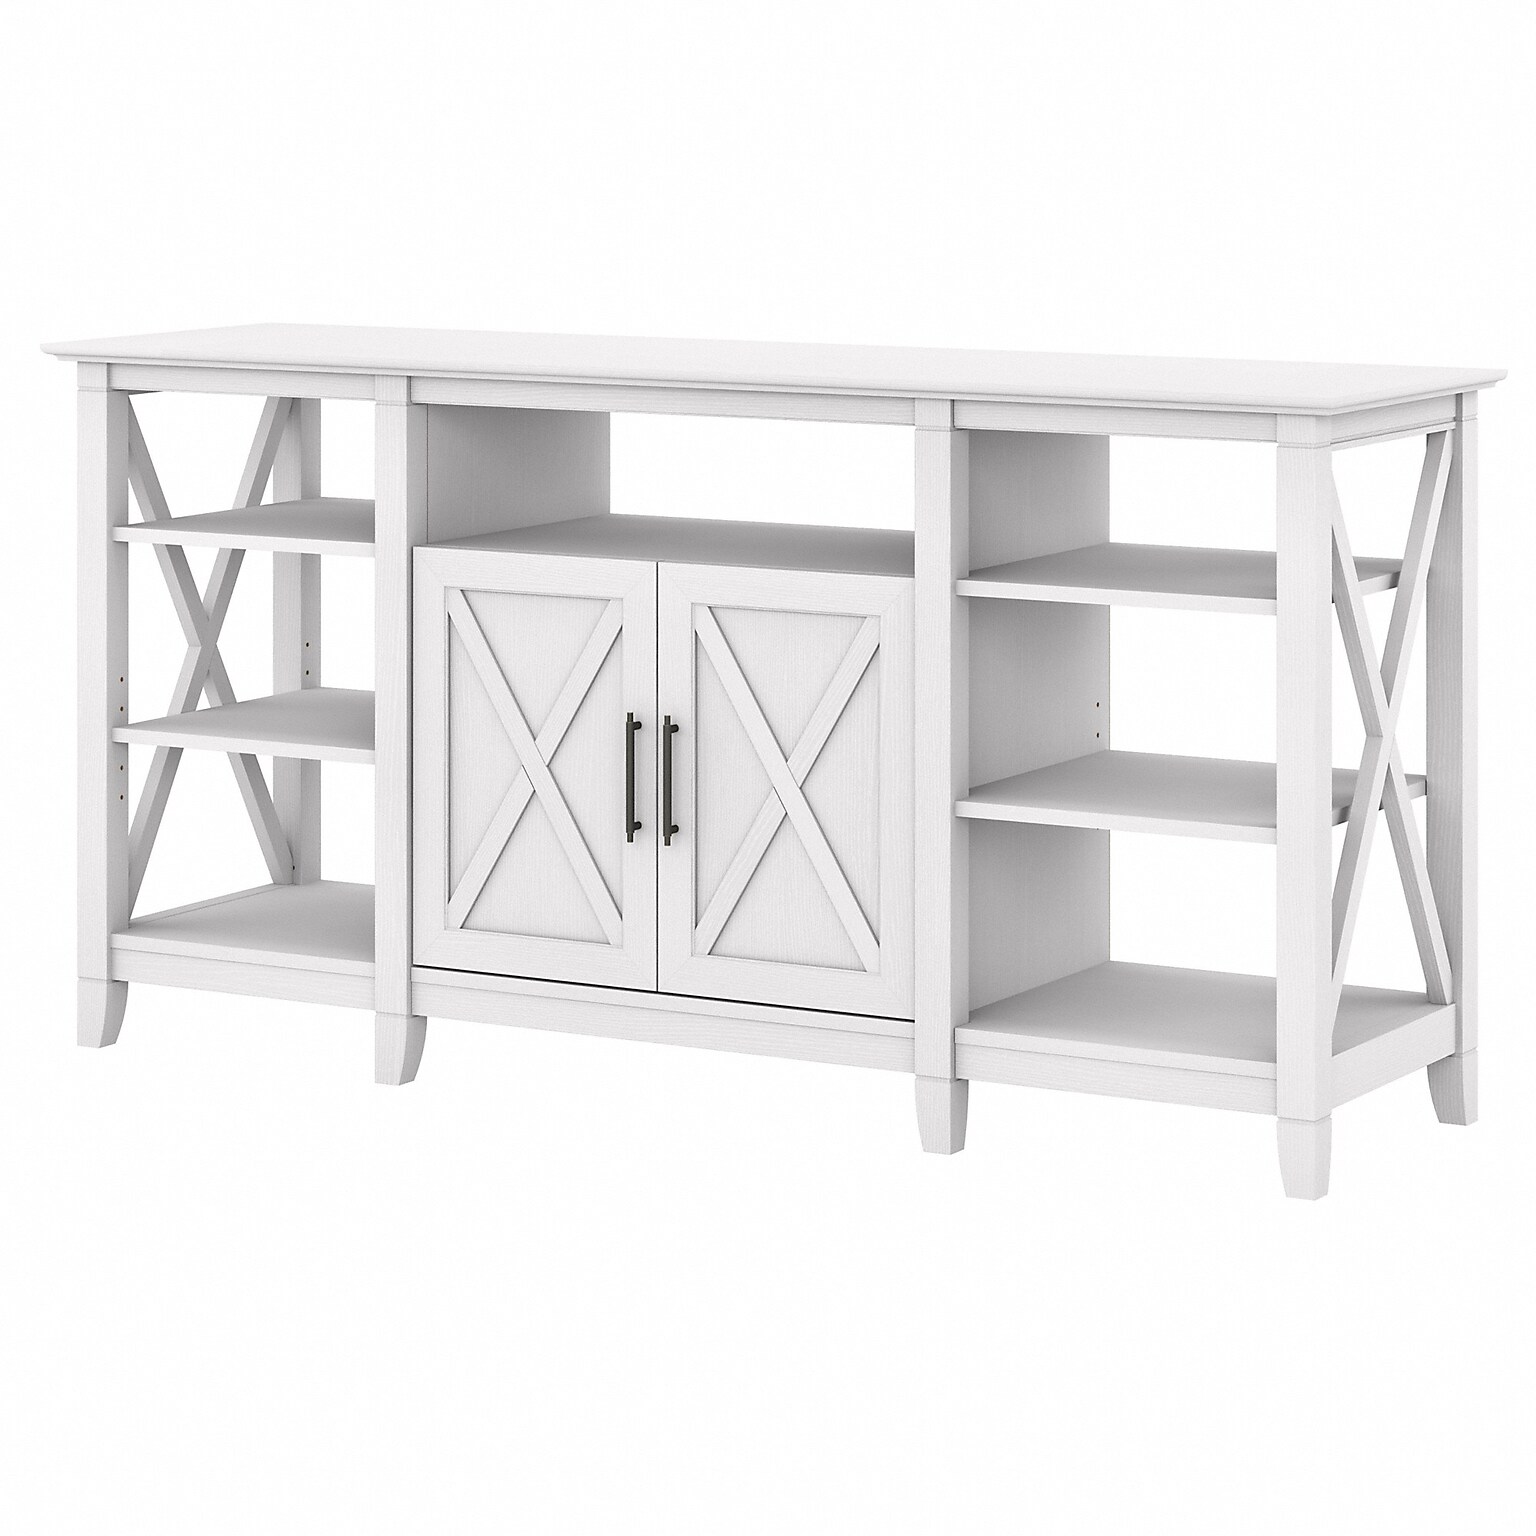 Bush Furniture Key West Manufactured Wood Console TV Stand, Screens up to 65, Pure White Oak (KWV160WT-03)